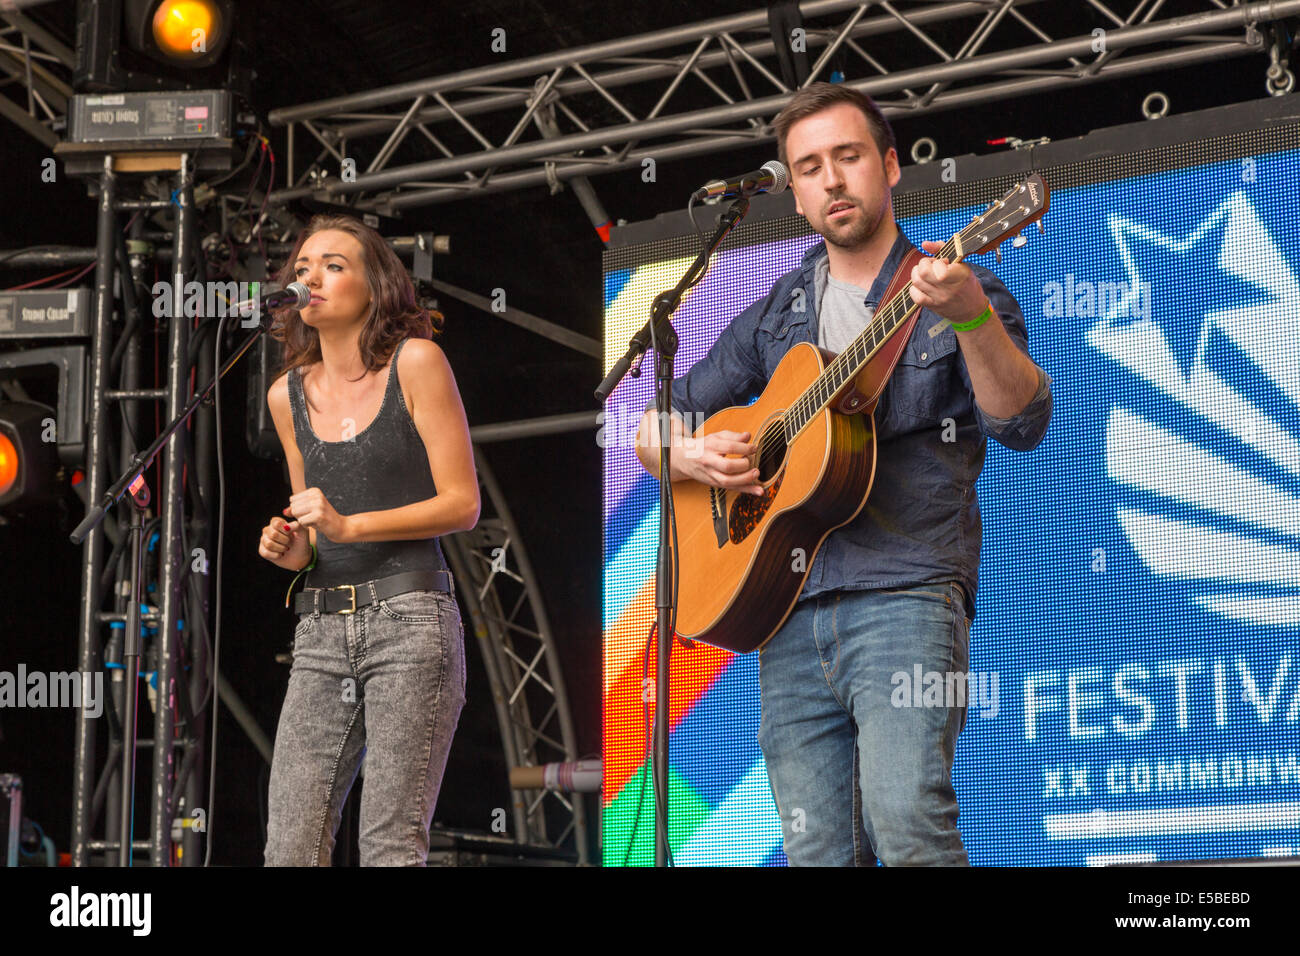 Man and woman perform on stage, singing with acoustic guitar. West End Festival, Glasgow, Scotland, UK, 2014 Stock Photo